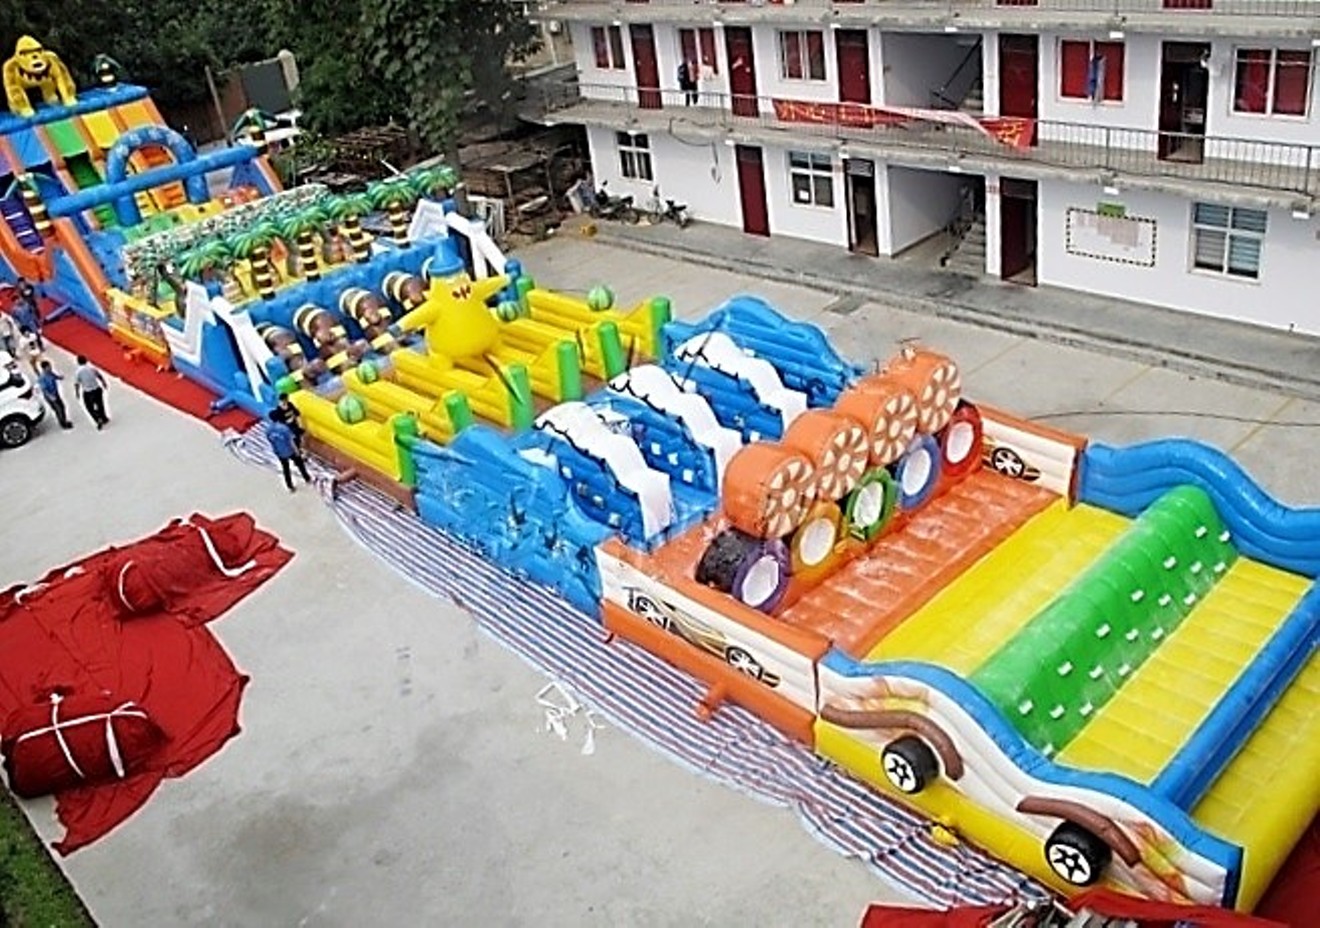 Somebody stole this unique inflatable "Super Mega" obstacle course worth $35,000.